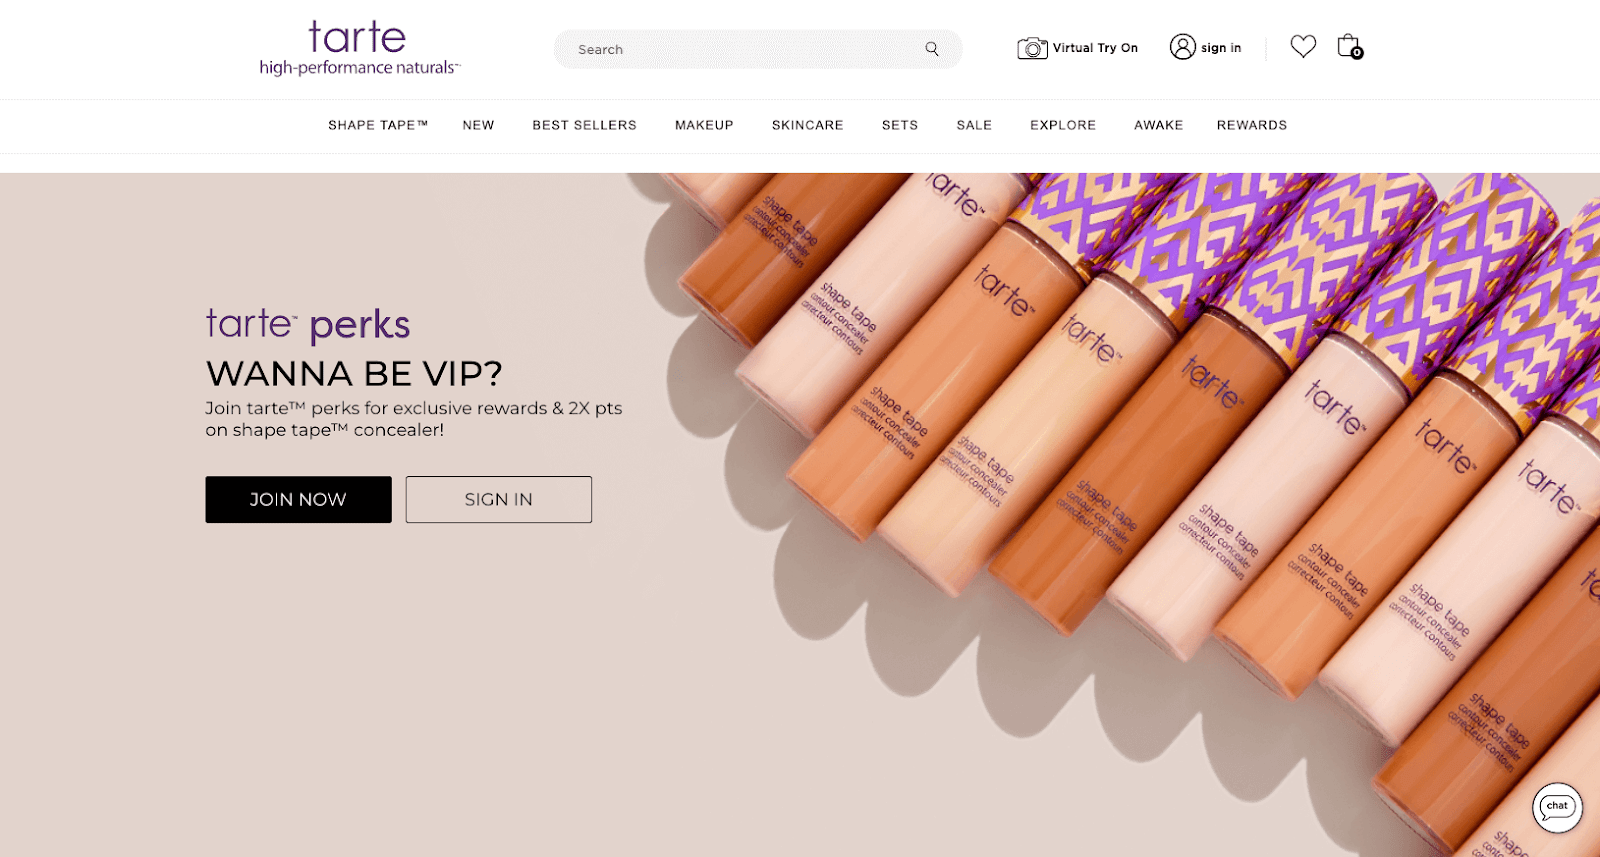 Rewards Case Study tarte perks–A screenshot of tarte perks’ rewards program explainer page. The banner image shows several of tarte’s shape tape concealers in various shades. Next to them is a blurb of text that reads, “tarte perks. Wanna be a VIP? Join tarte perks for exclusive rewards and 2x points on shape tape concealer!” There are two buttons that invite customers to ‘Join Now’ or ‘Sign In’. 